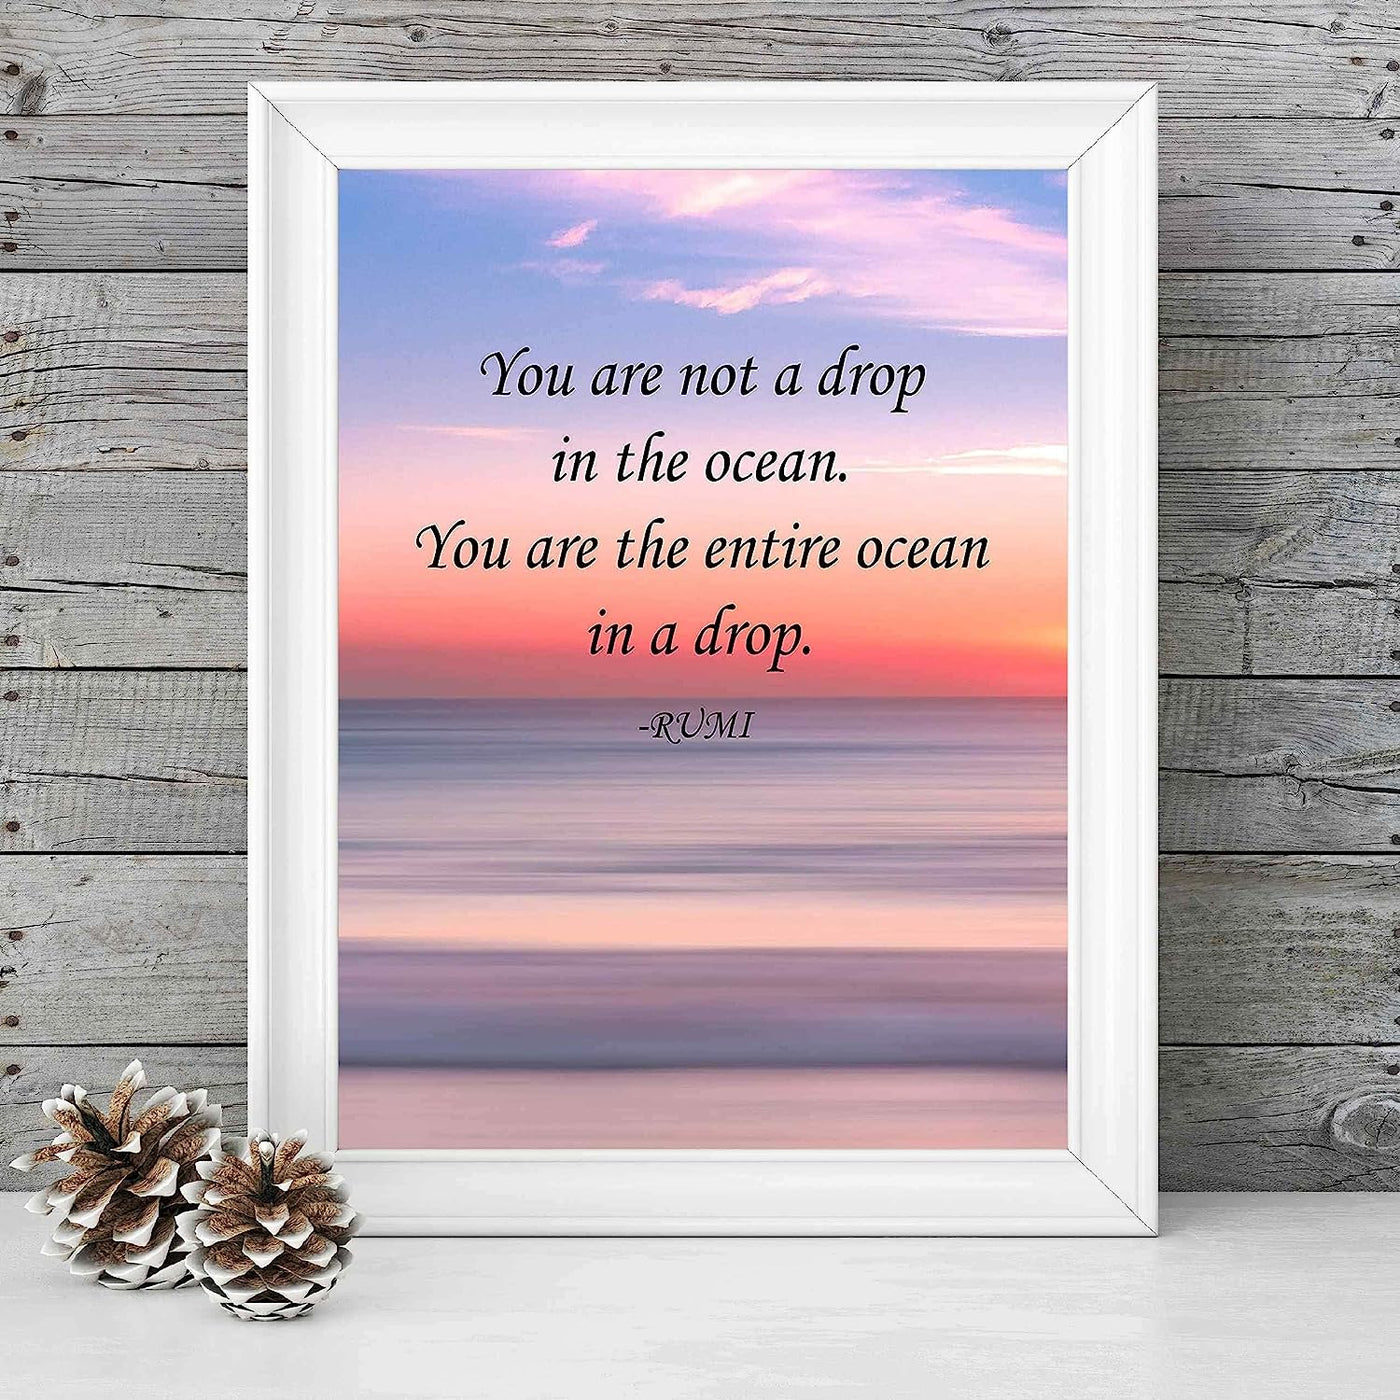 You Are Not A Drop In The Ocean-Rumi Inspirational Quotes Wall Sign-8 x 10" Beach Sunset Print-Ready to Frame. Modern Typographic Design. Home-Office-Dorm-Spiritual Decor. Great for Inspiration!